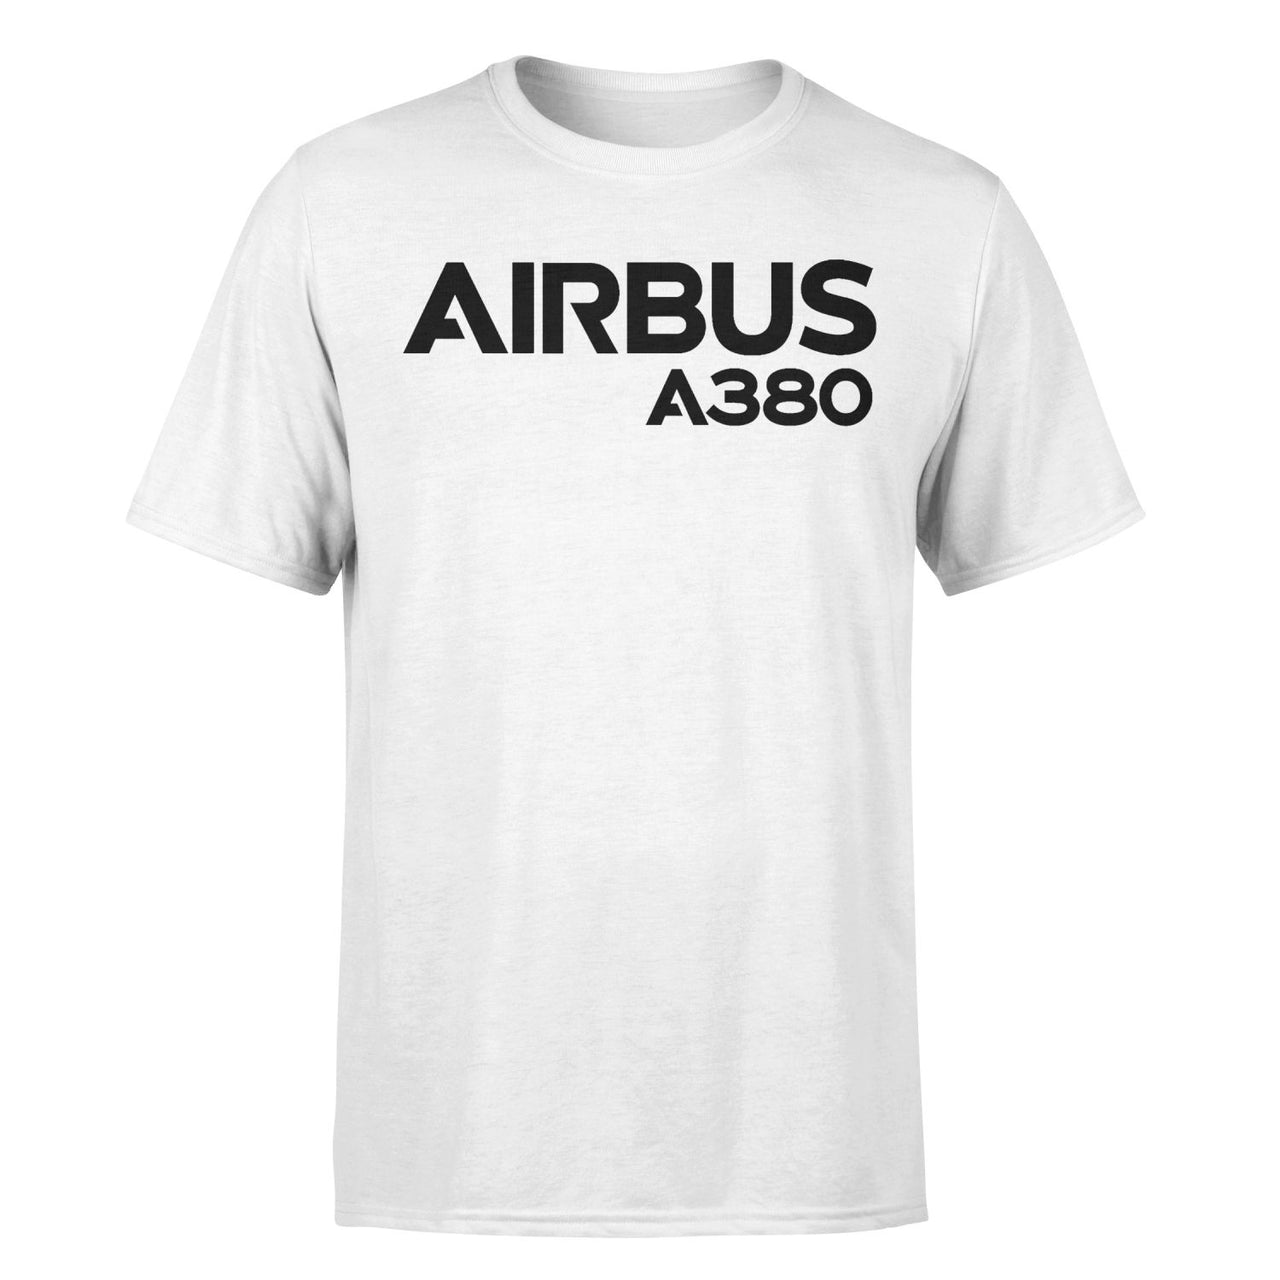 Airbus A380 & Text Designed T-Shirts